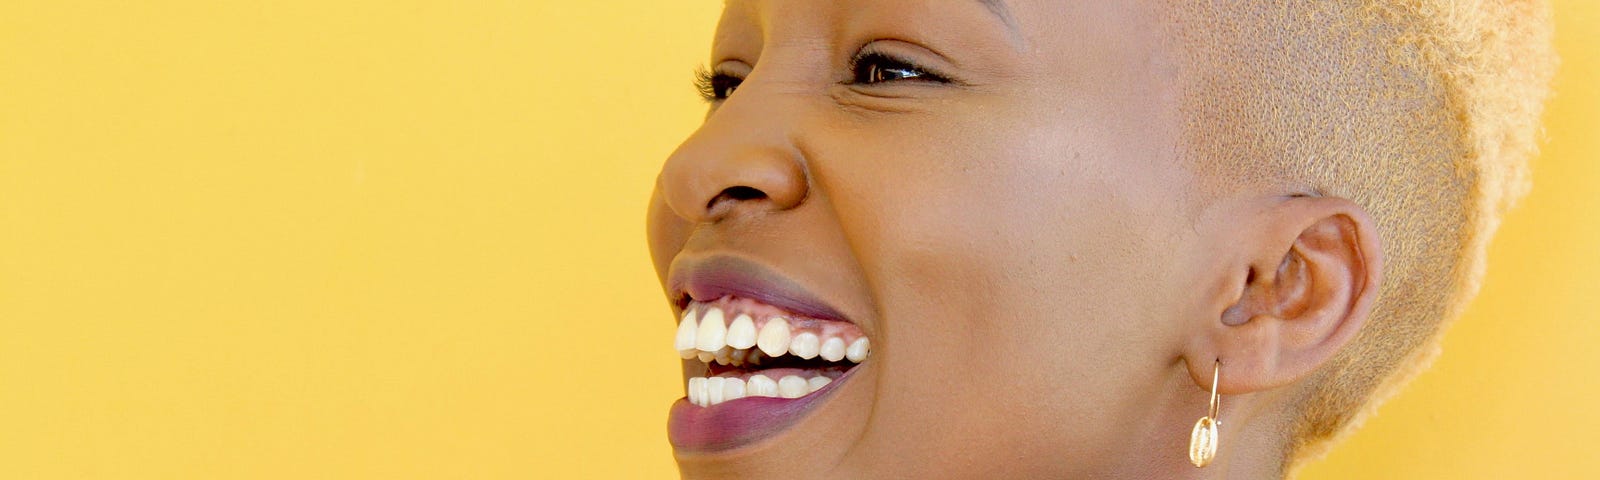 Black woman with short blond hair laughing